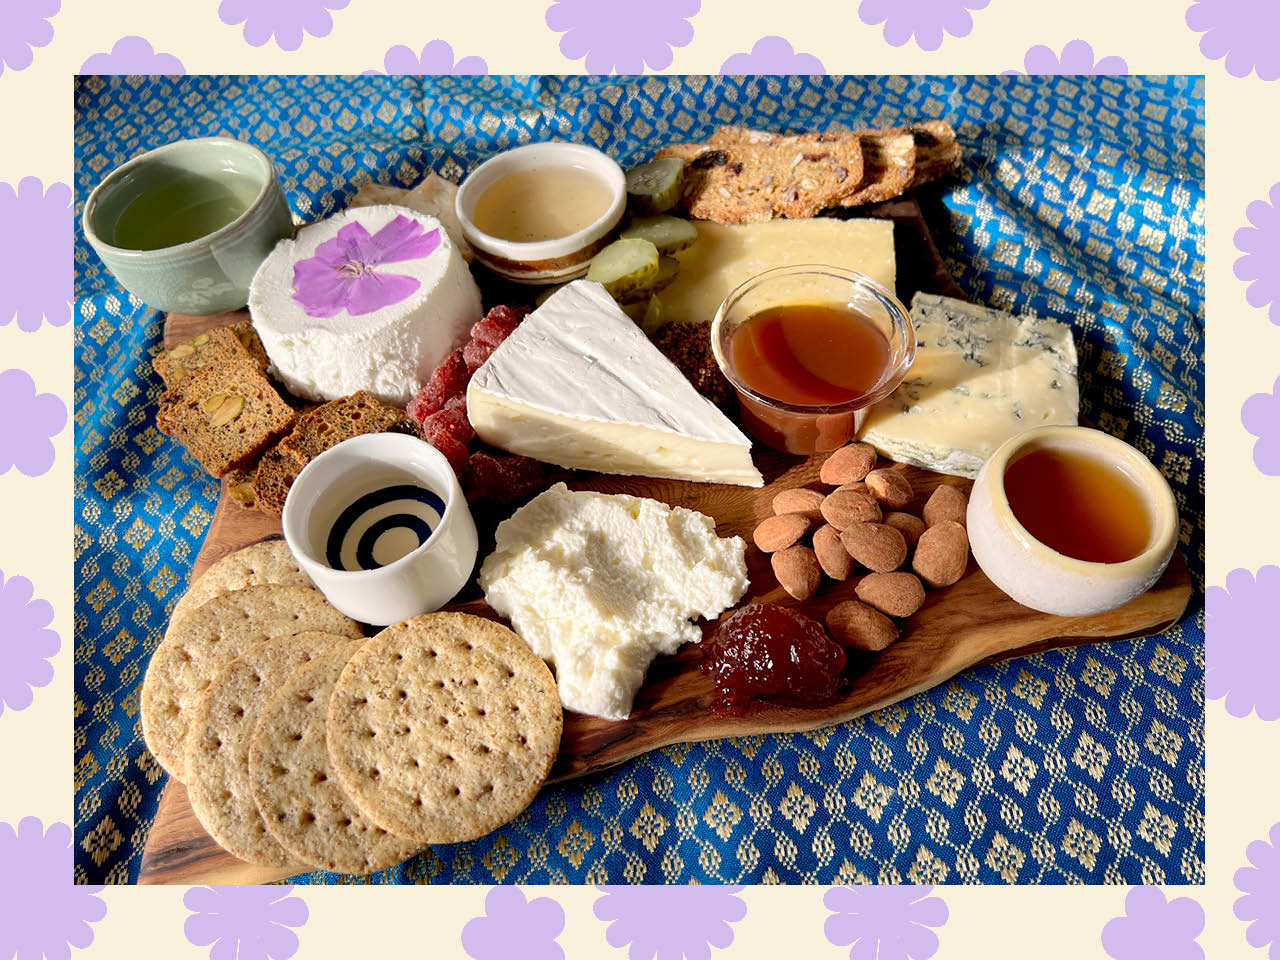 A cheeseboard with various nuts, crackers, cheese and cups of tea.